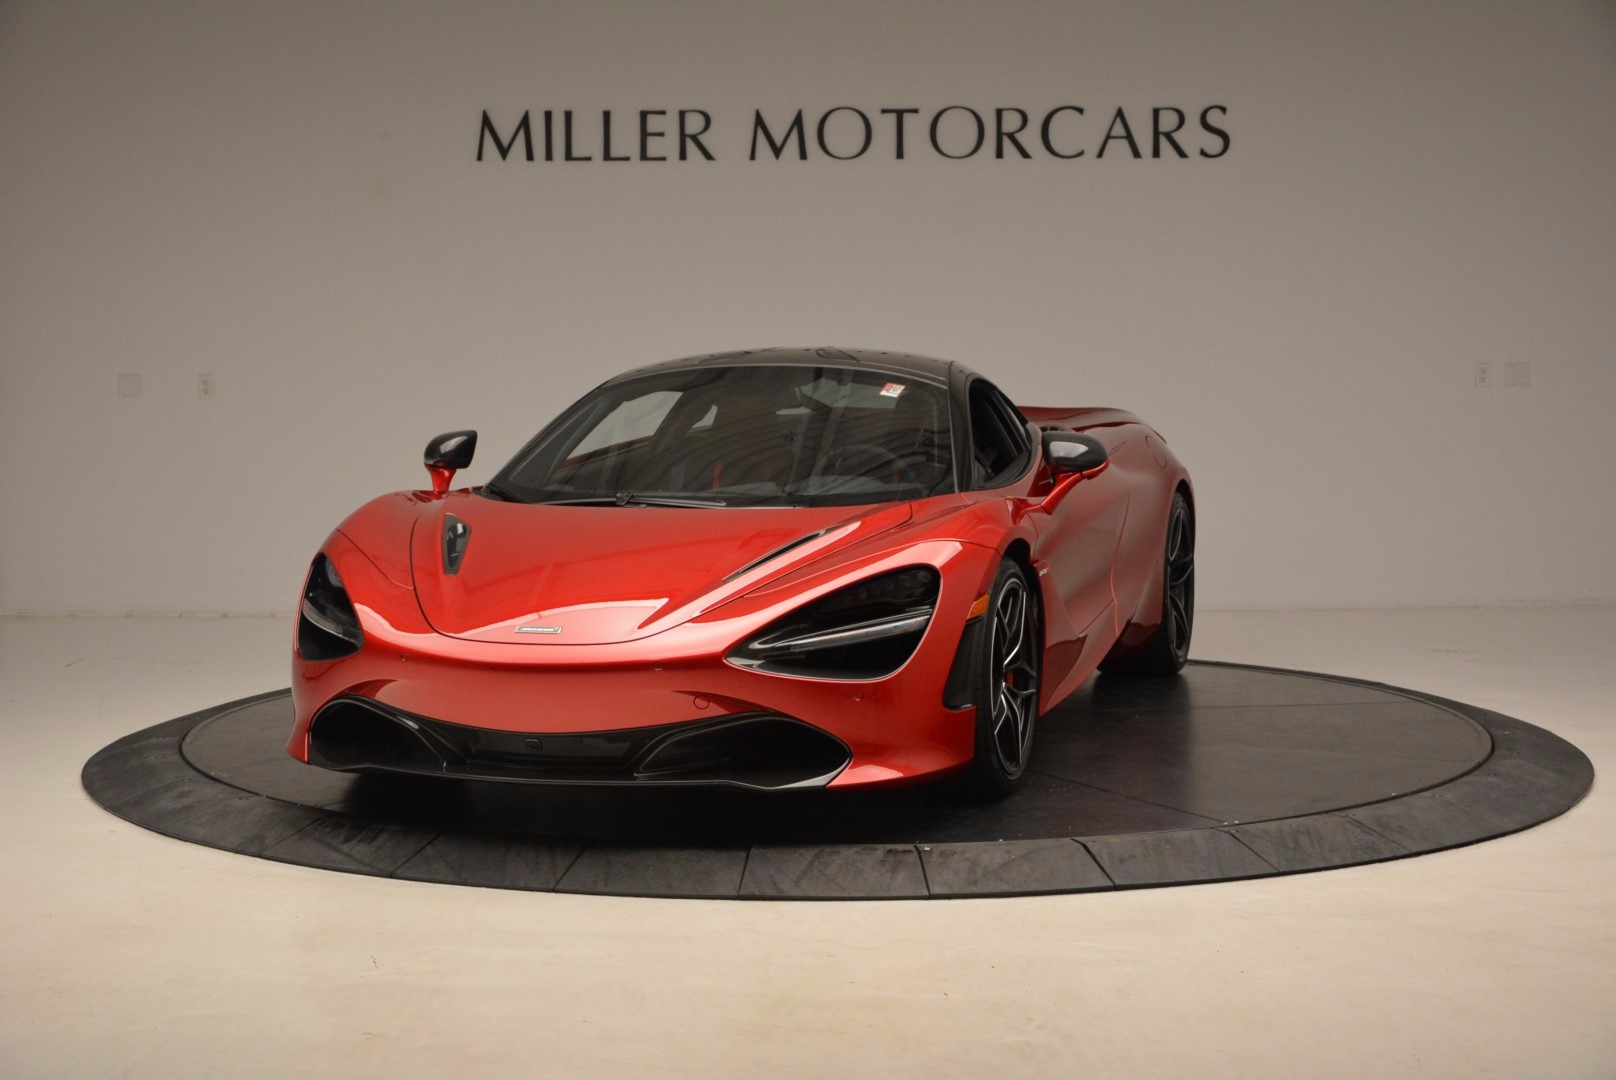 New 2018 McLaren 720S - TAKING ORDERS NOW for sale Sold at Pagani of Greenwich in Greenwich CT 06830 1